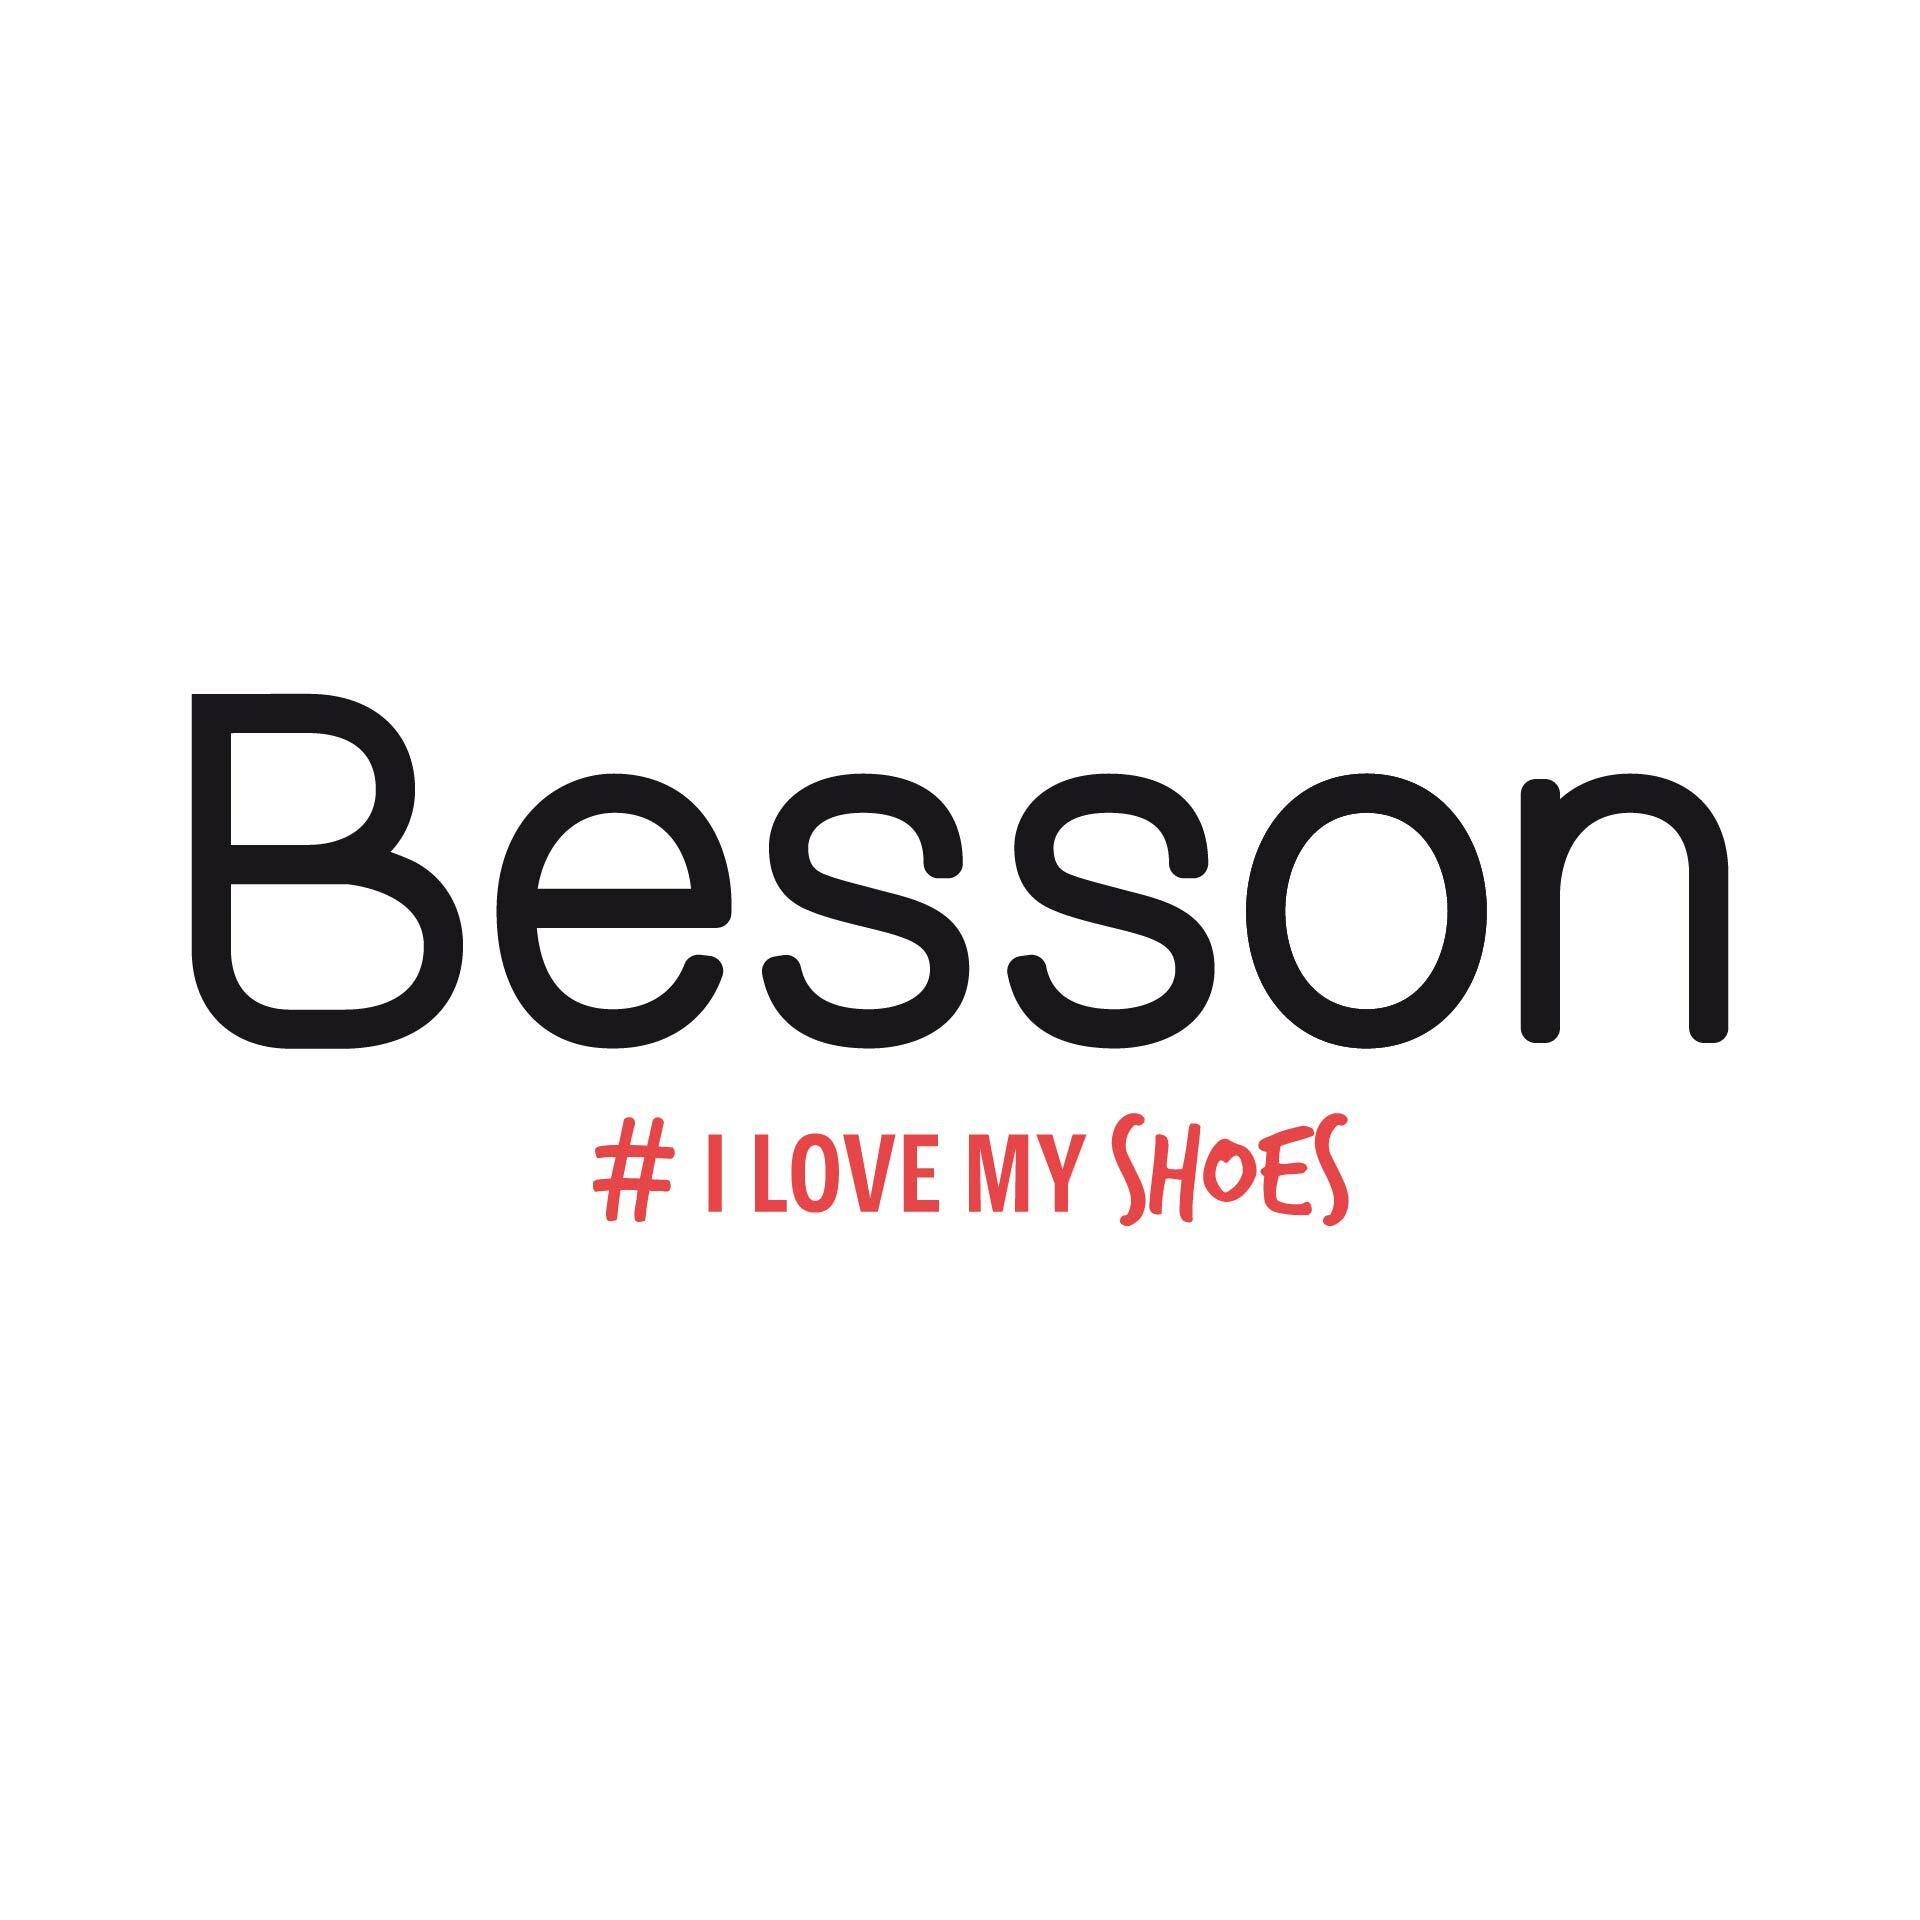 Besson Chaussures Issy Les Moulineaux Issy Les Moulineaux